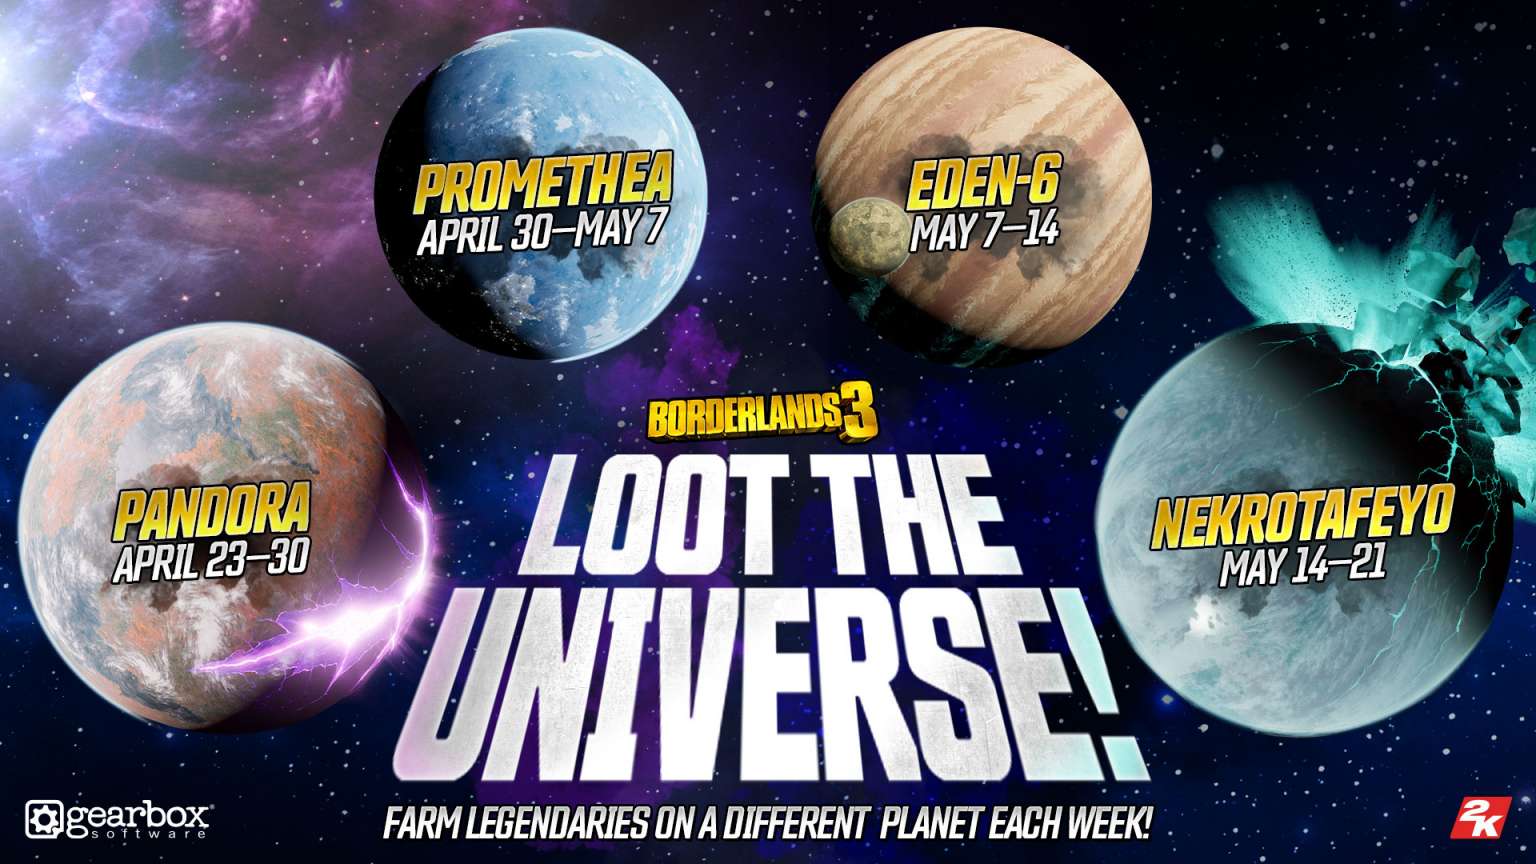 Borderlands 3 Begins Its Loot The Universe Event Encouraging Players To